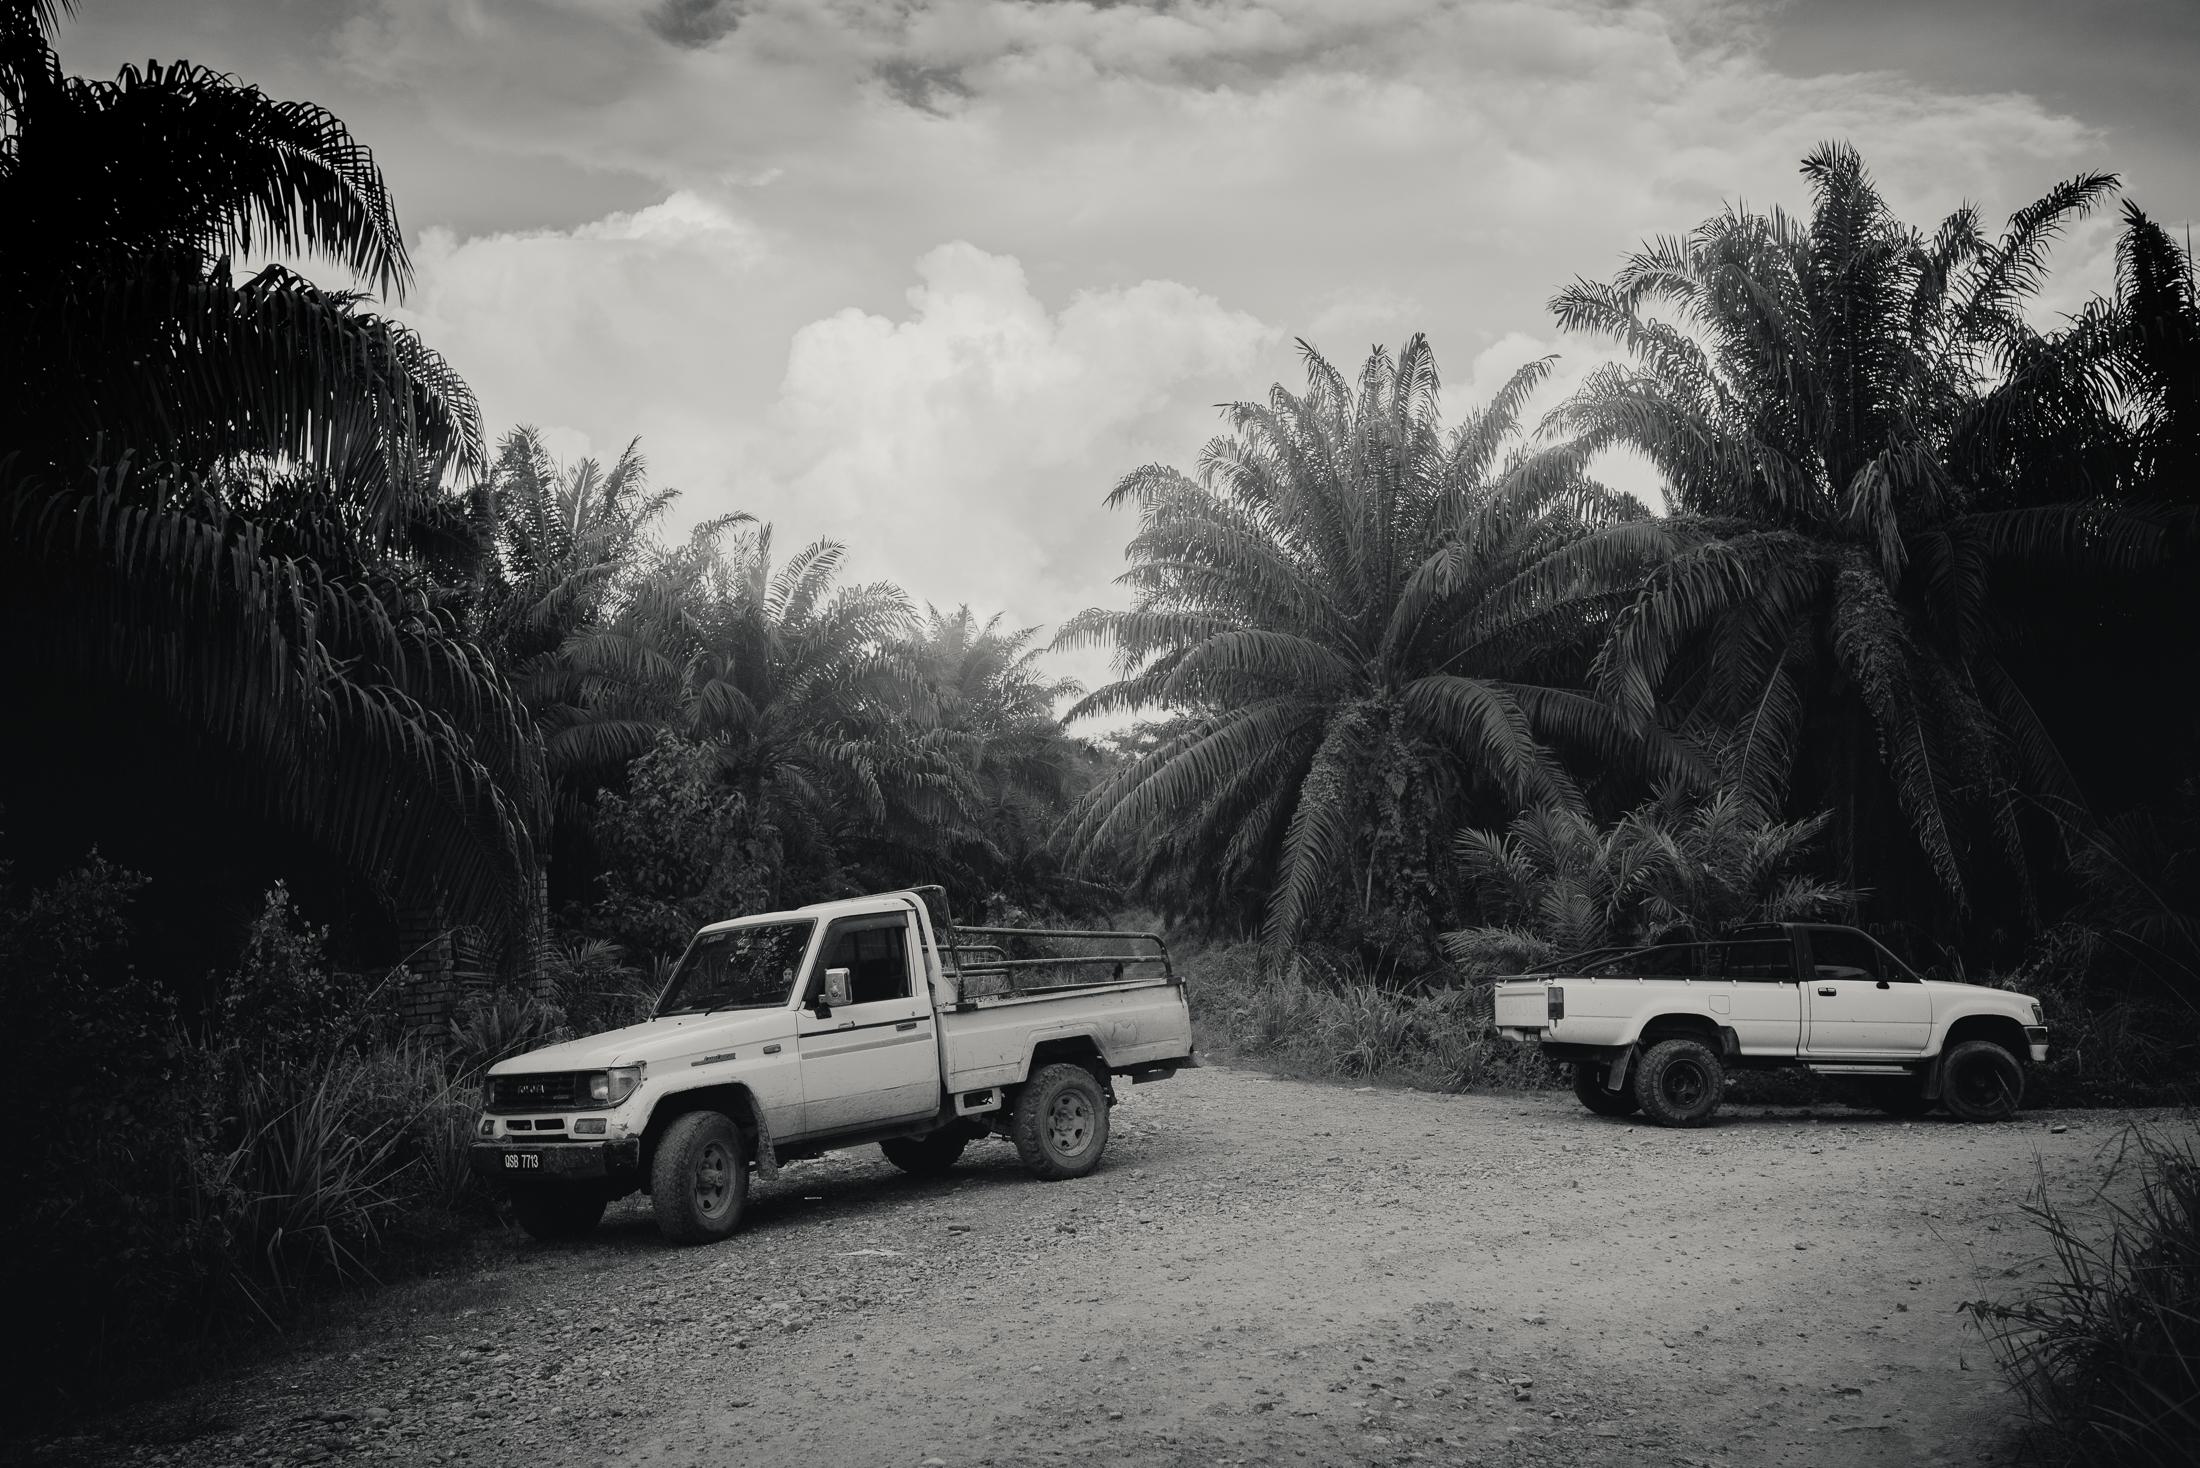 Indigenous Land Rights in Sarawak -  An Oil Palm Plantation in Borneo, Malaysia.       